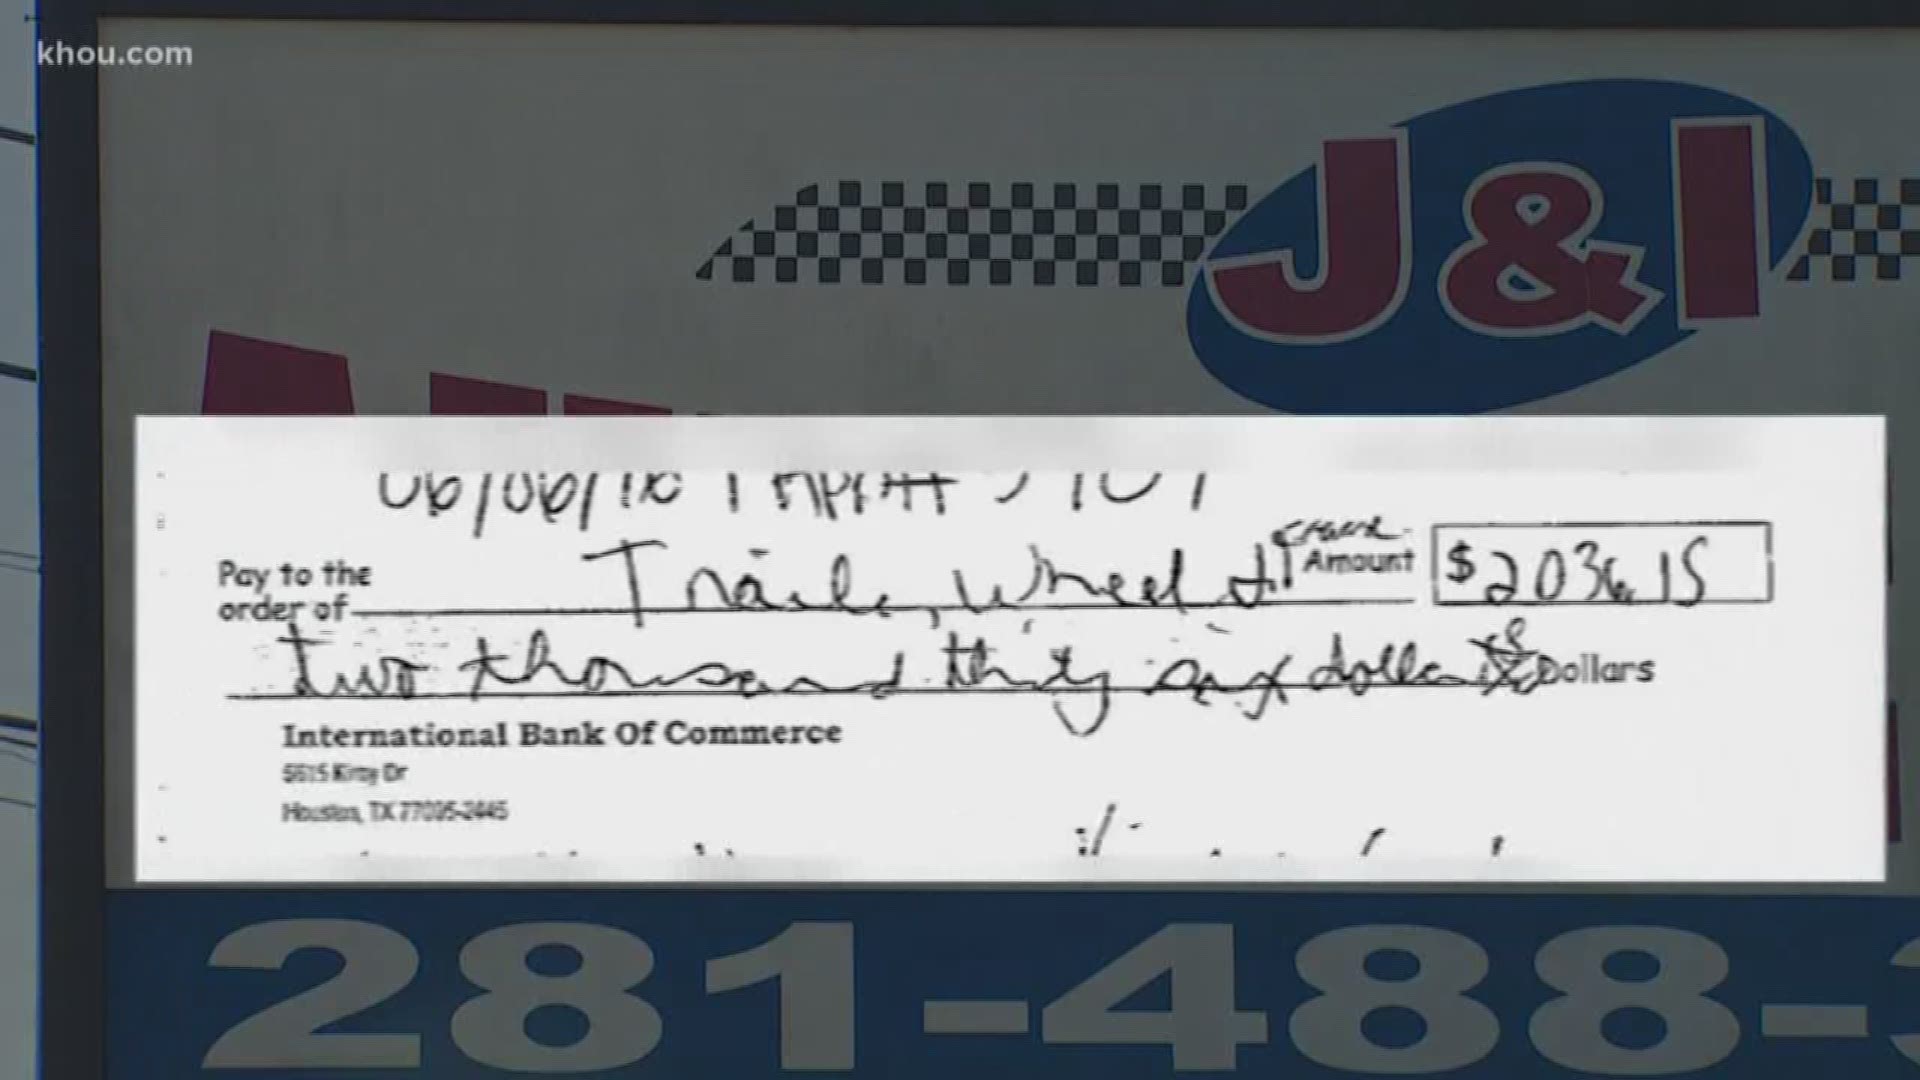 An auto shop owner said a checking account number, primarily used for his business, ended up on checks other than his own.